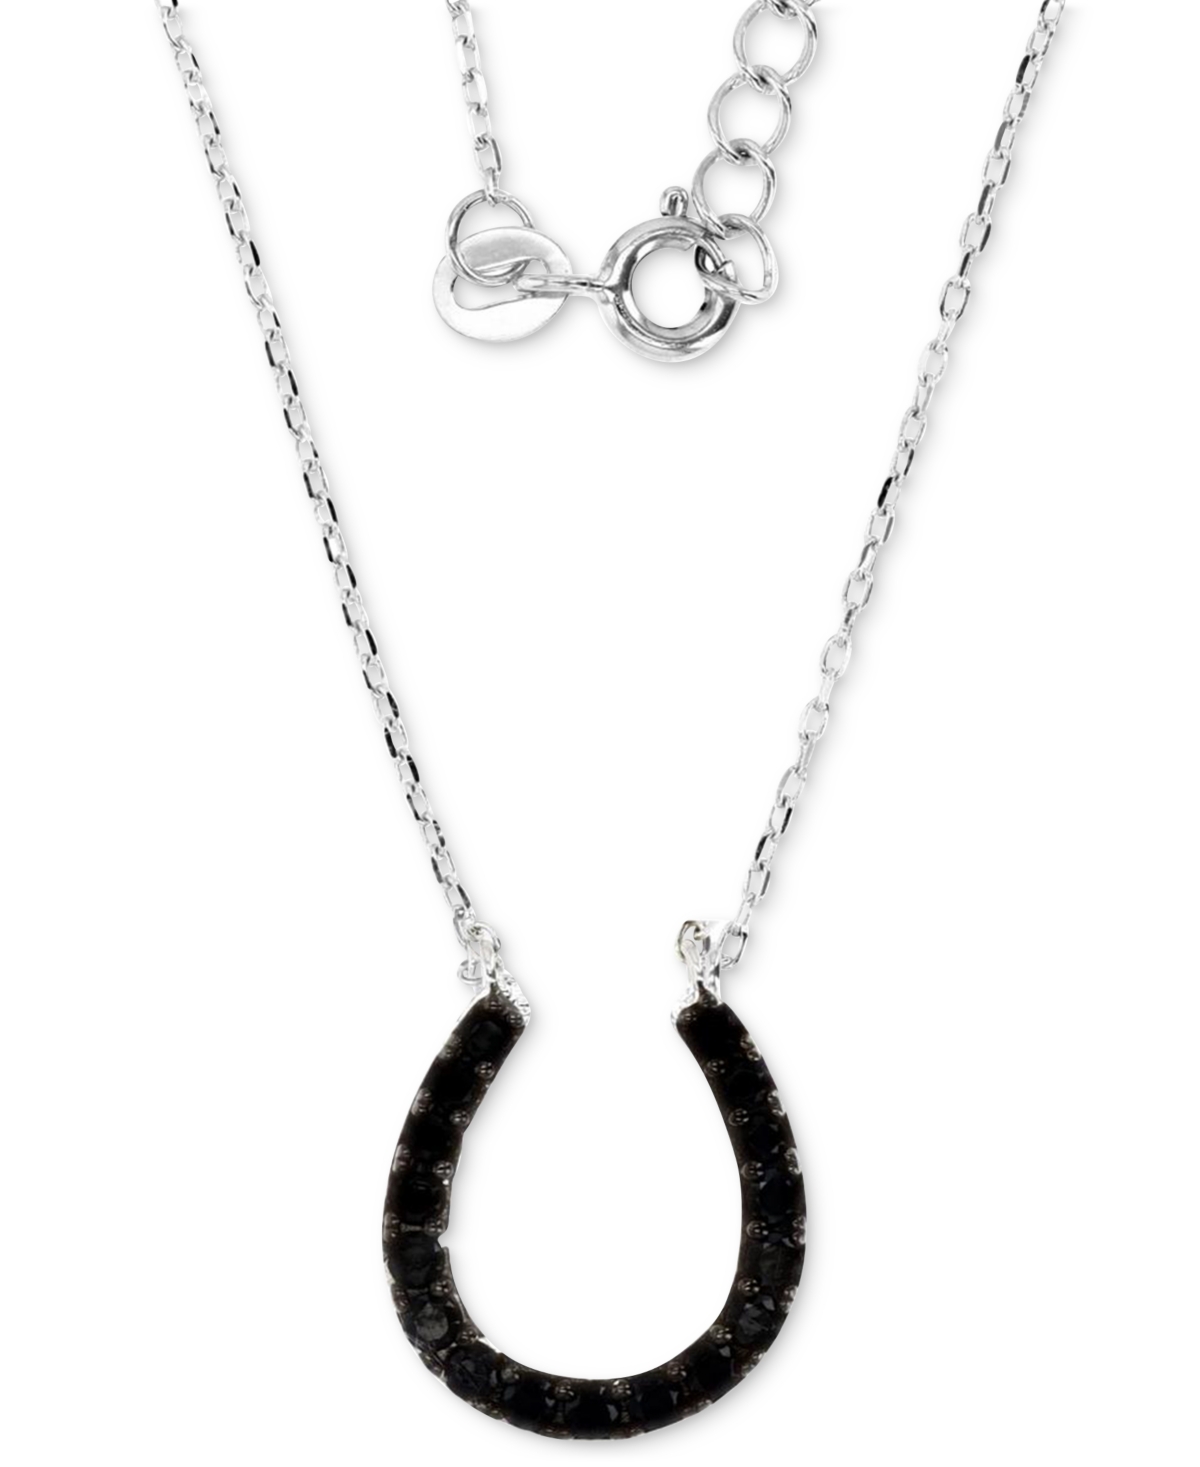 Black Spinel Lucky Horseshoe Pendant Necklace (3/4 ct. t.w.) in Sterling Silver, 16" + 2" extender - Black Spinel